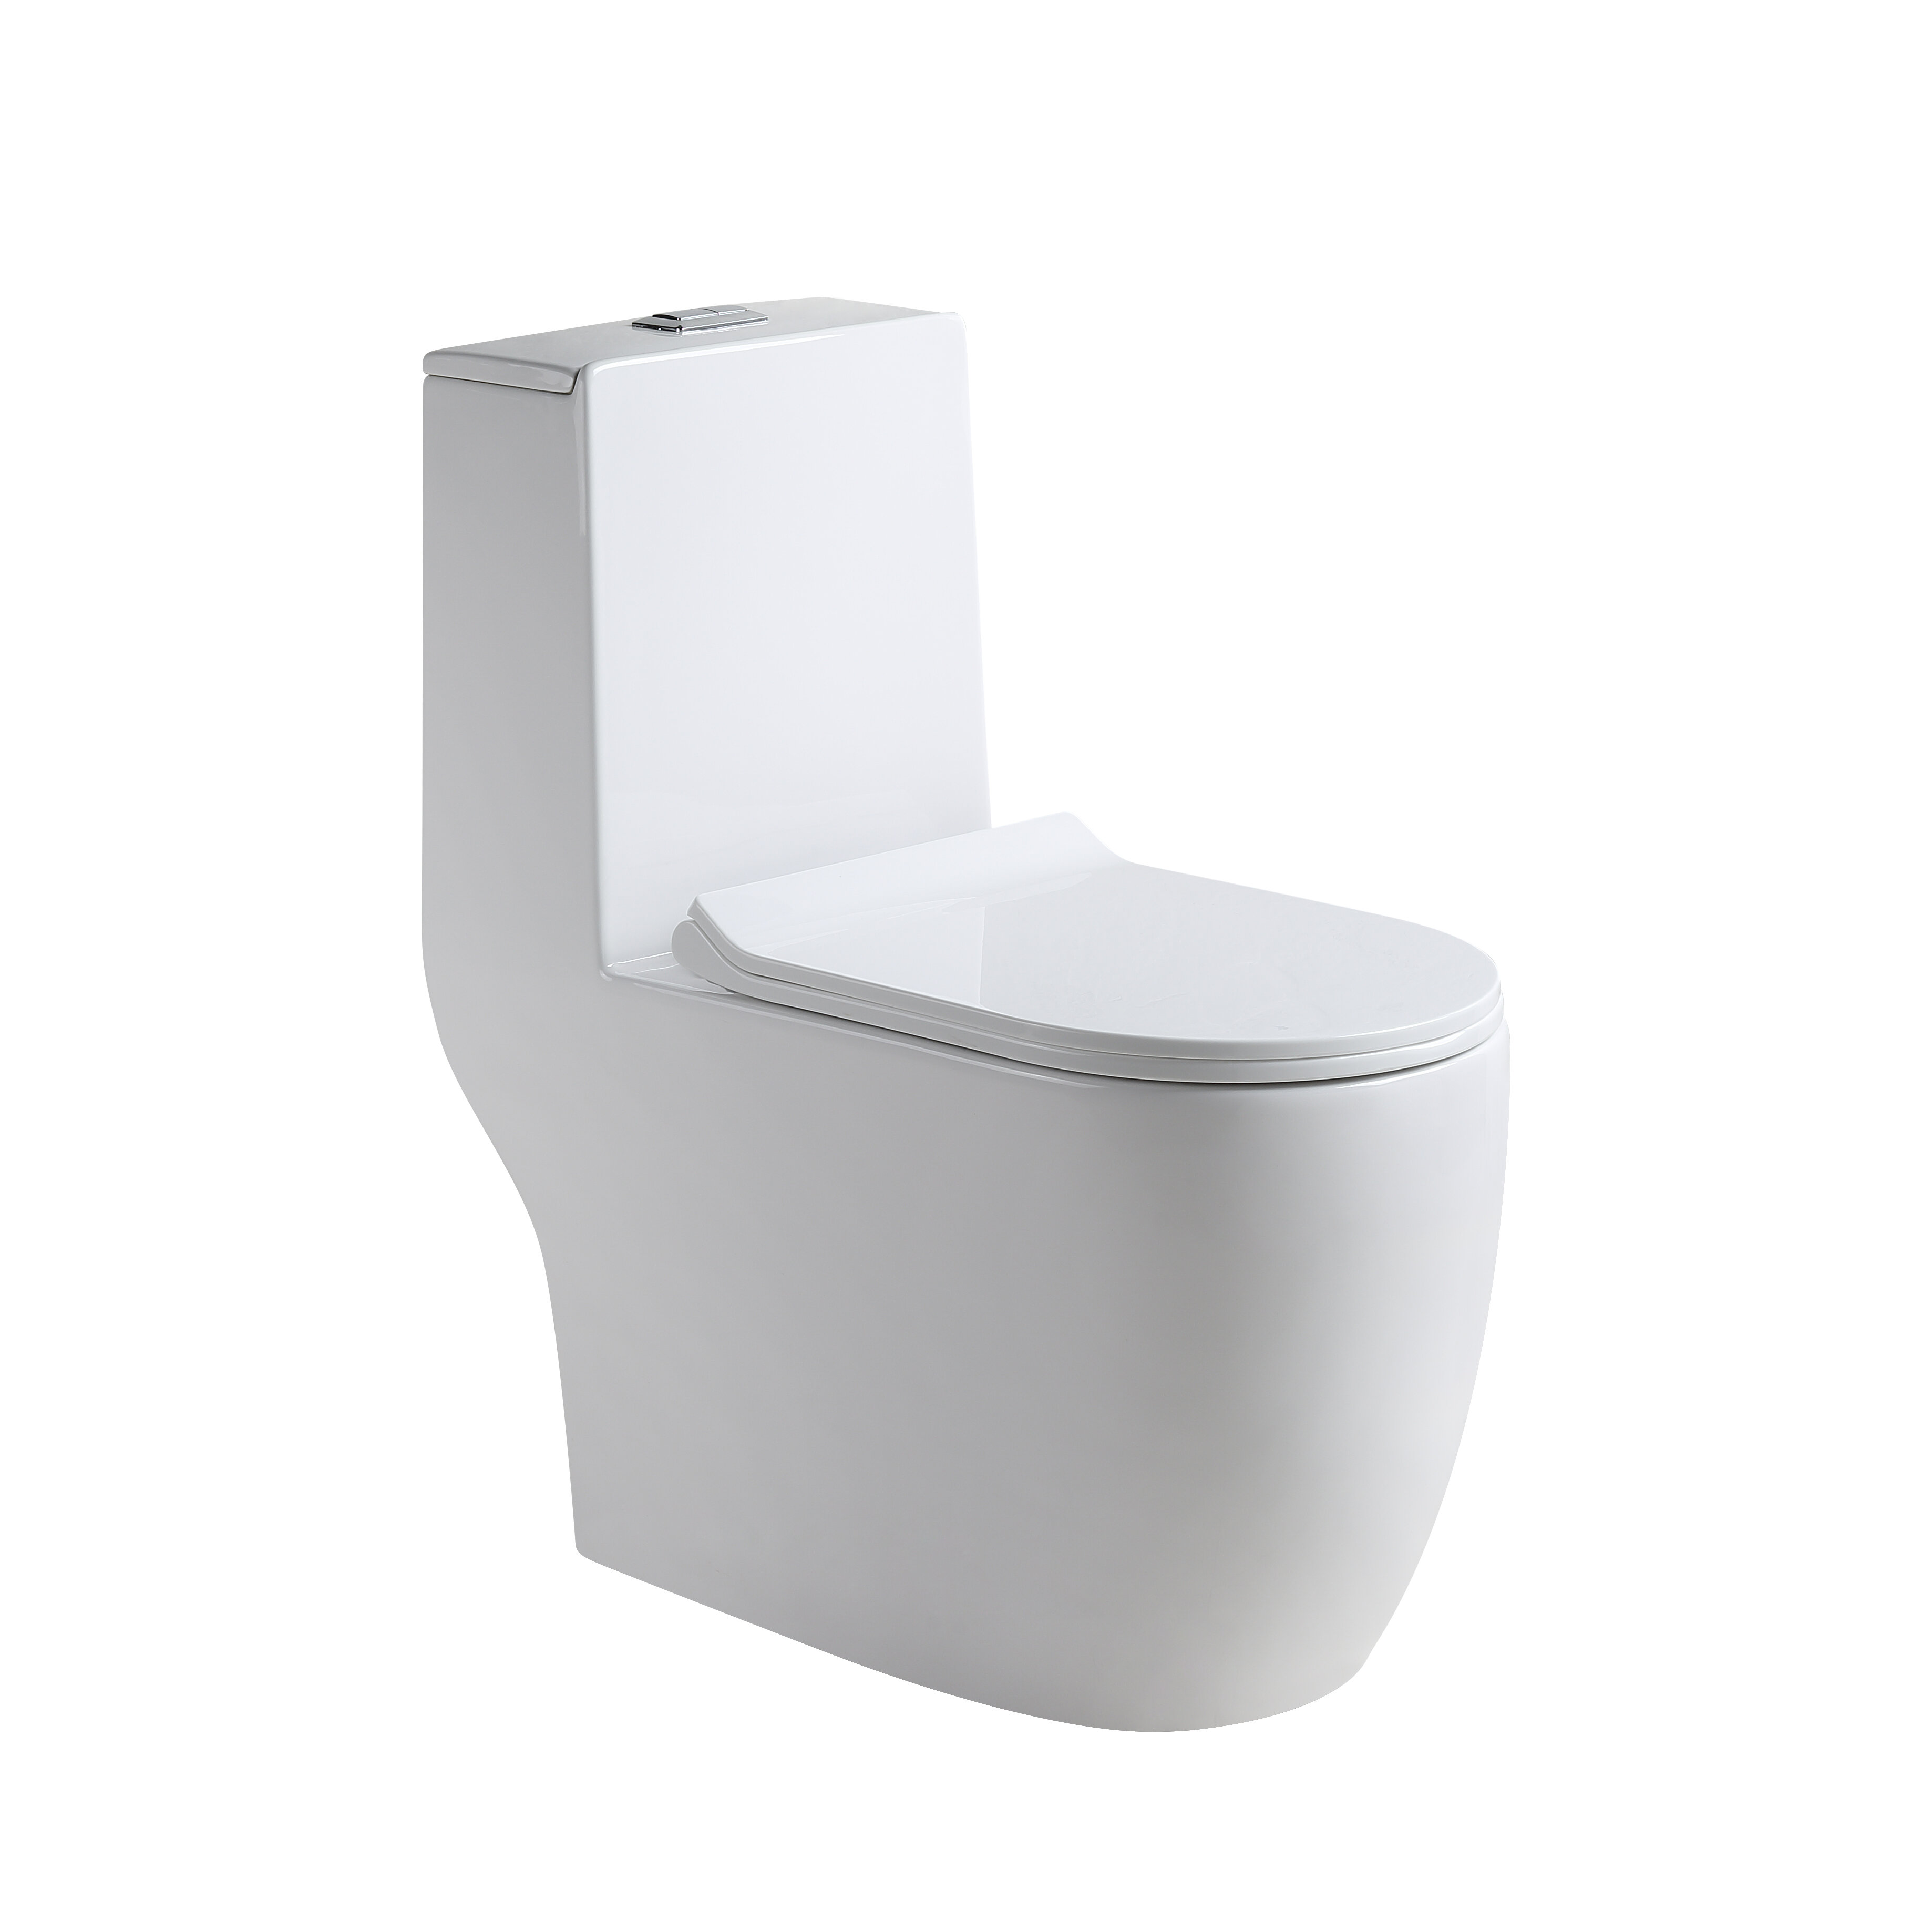 Hometure One Piece Toilet Dual Flush Elongated Square Bowl With Soft Closing Seat 